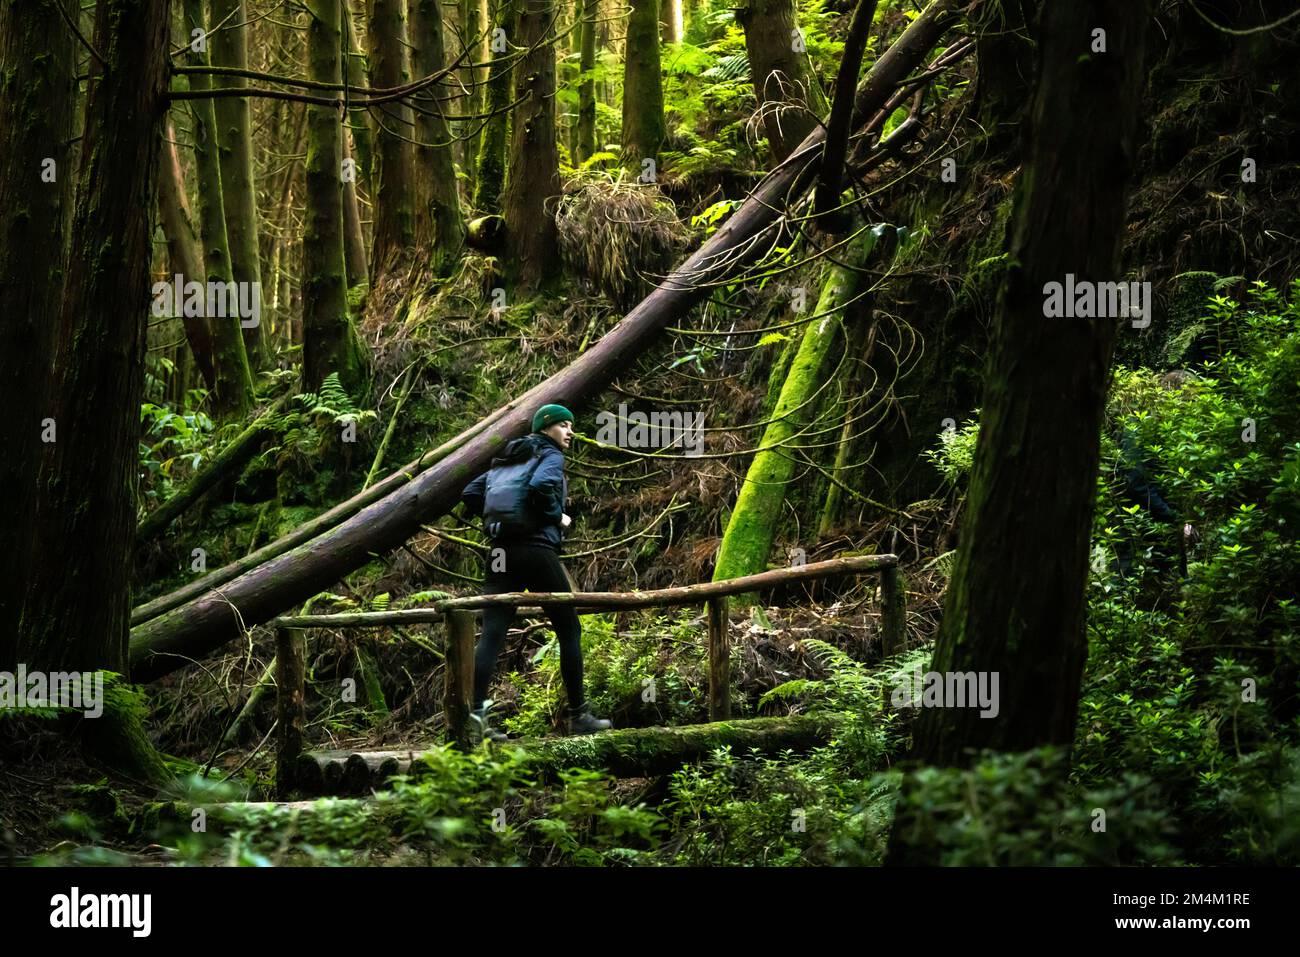 Girl hiking in a dense forest stock photo